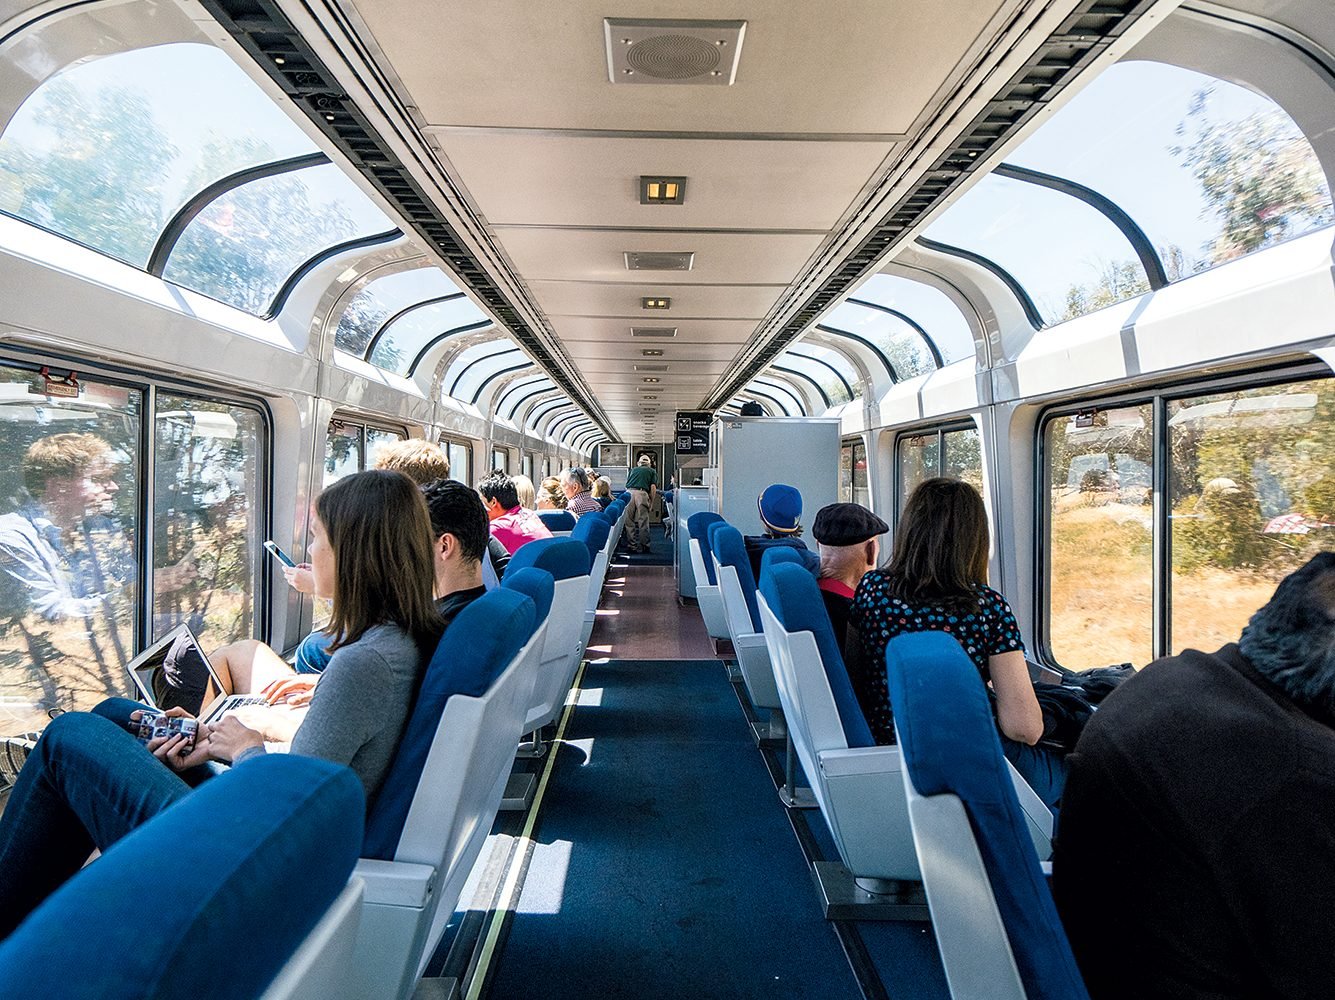 While double-decker trains with observation cars can’t fit through the tunnels and under the wires found along the East Coast, they’re common in wide-open spaces in the rest of the country. Photograph by Nigel Killeen/Getty Images.